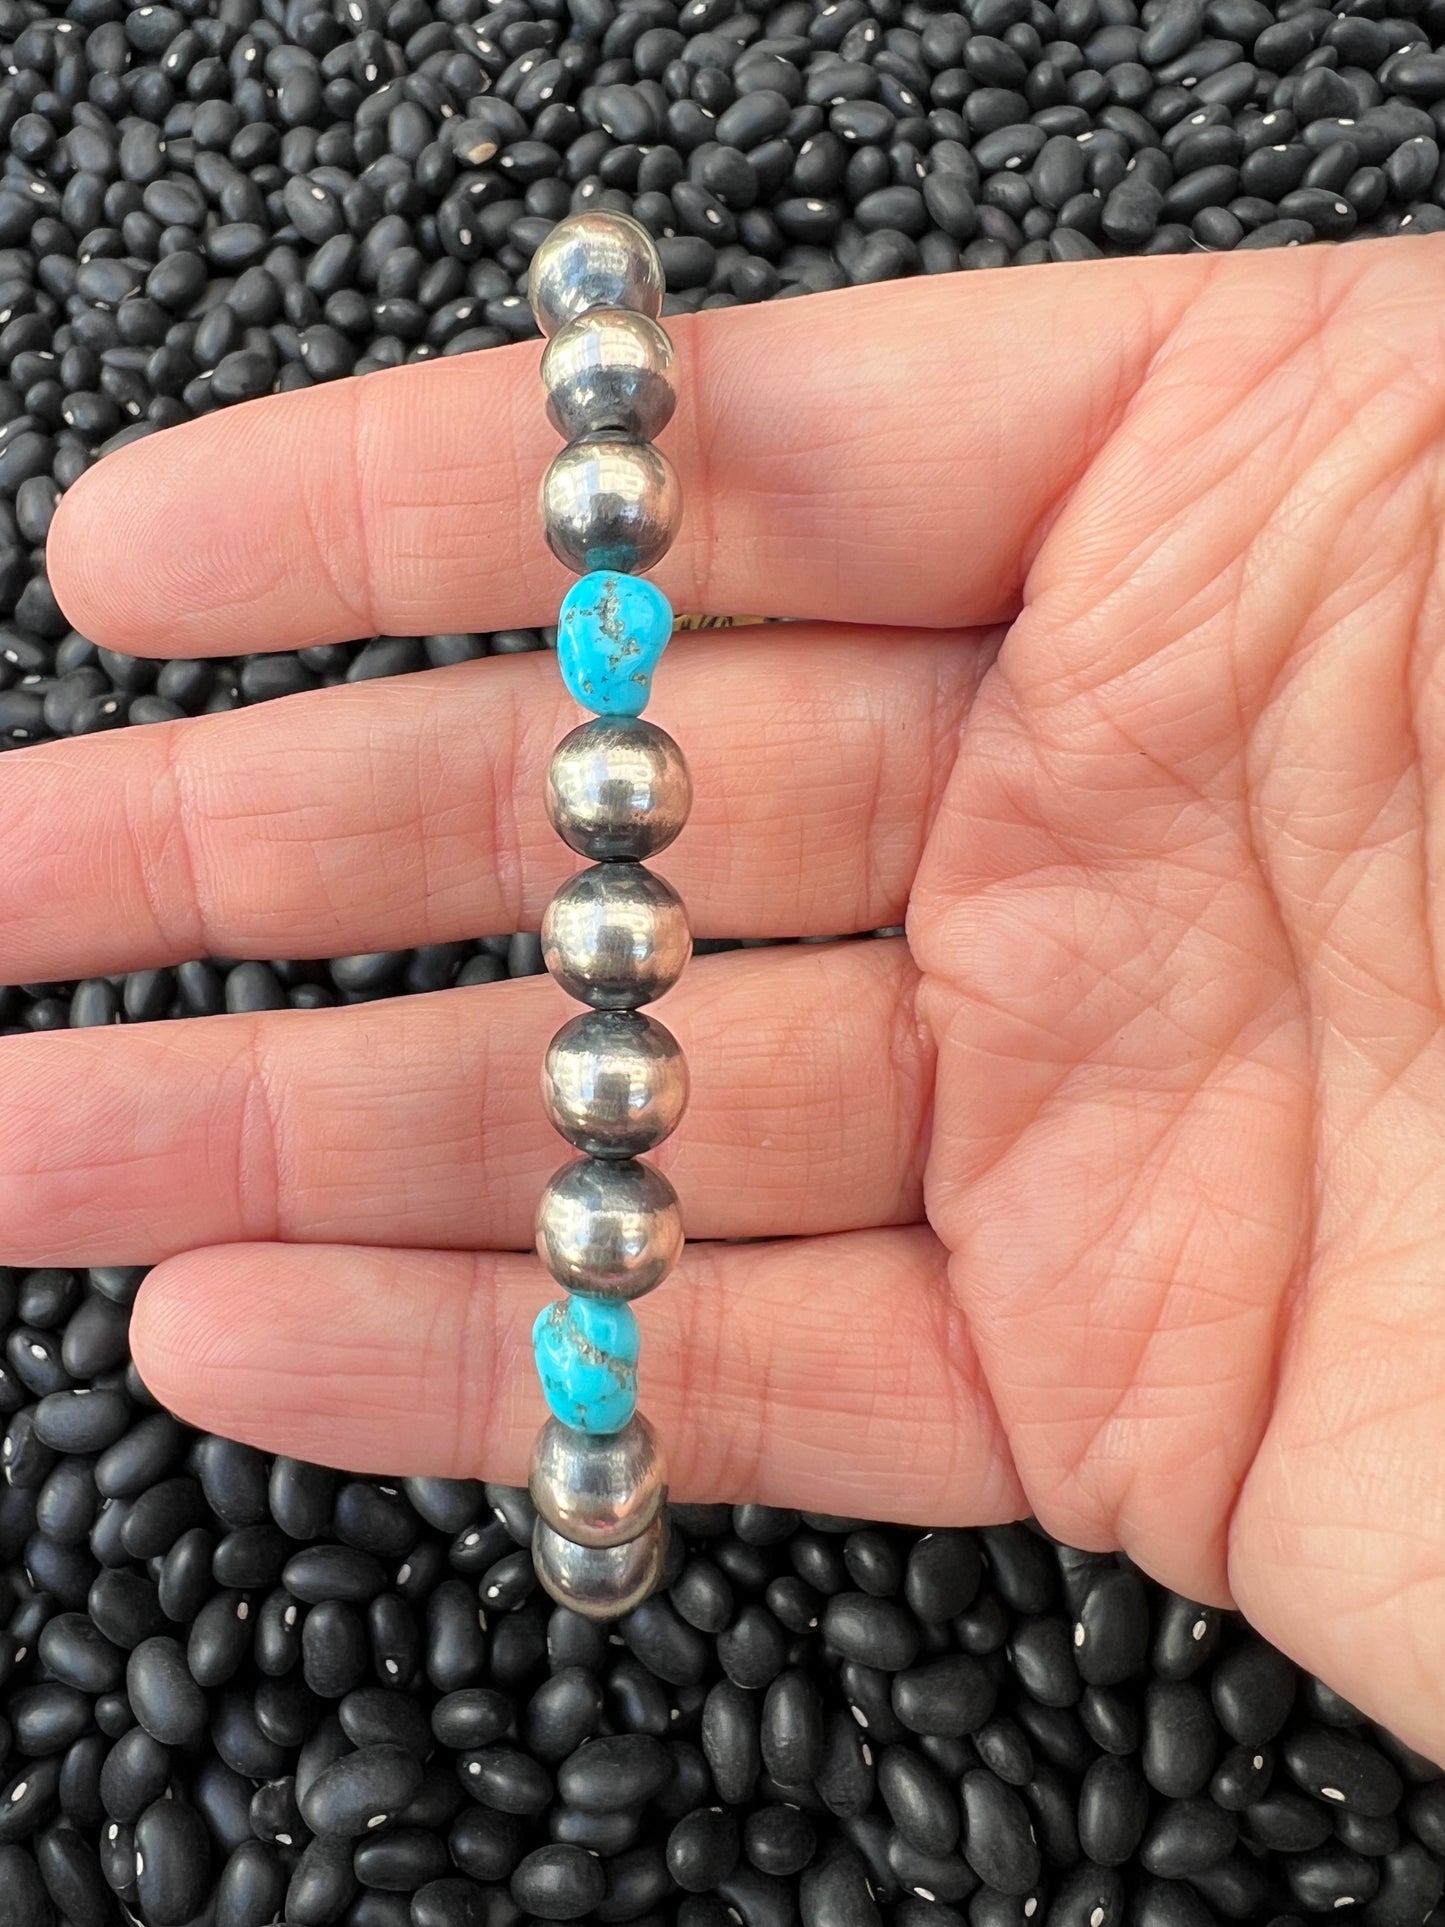 Large 8mm sterling silver pearls with turquoise nuggets necklace or bracelet